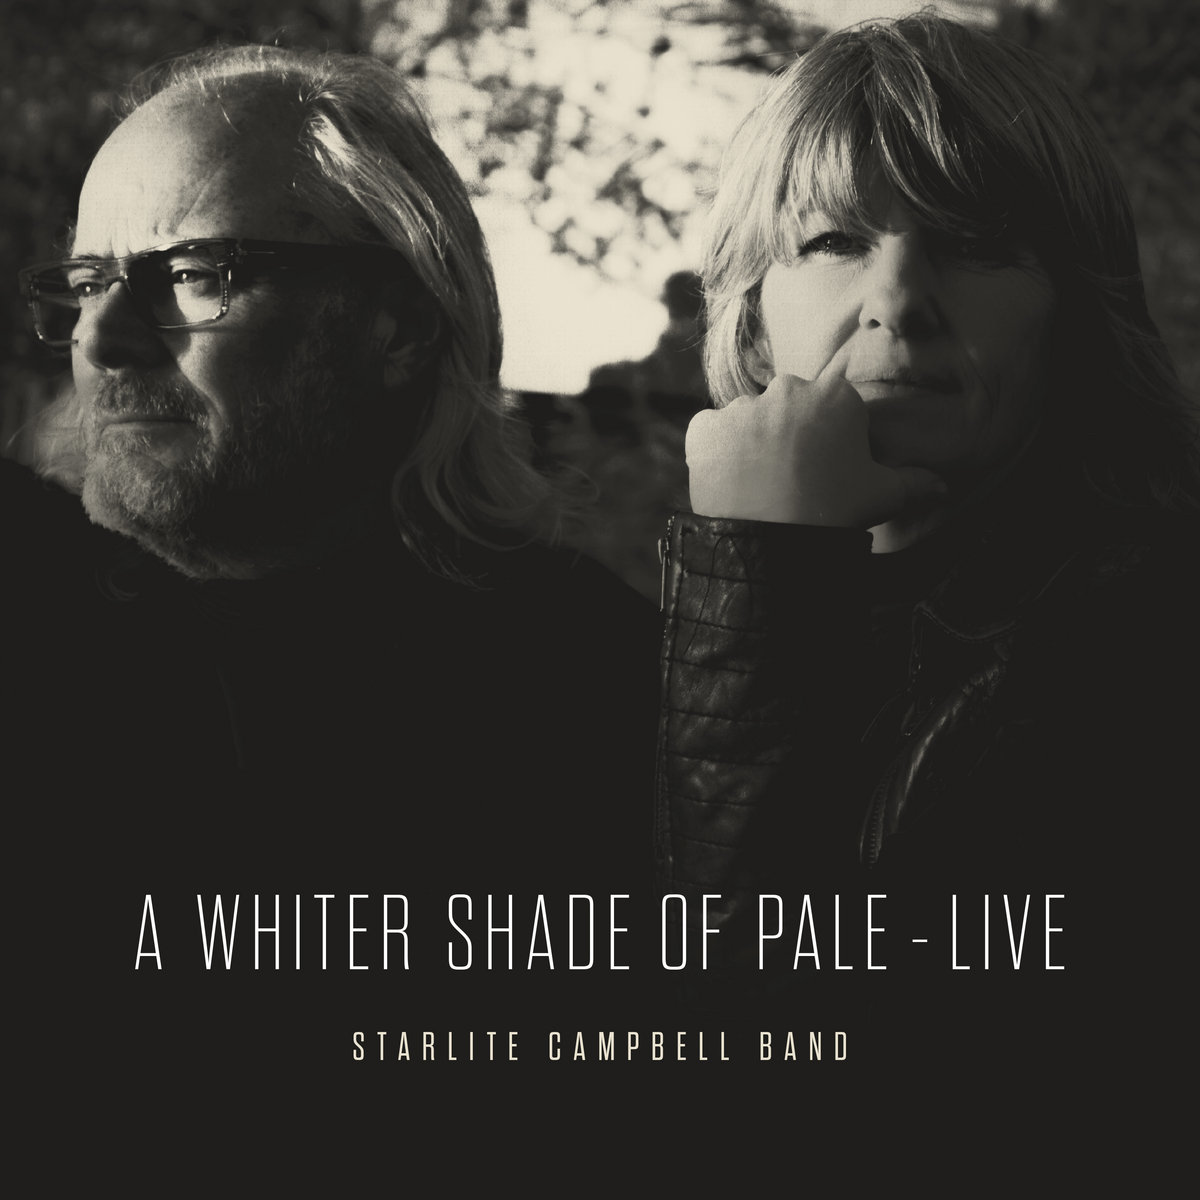 A Whiter Shade Of Pale - Live